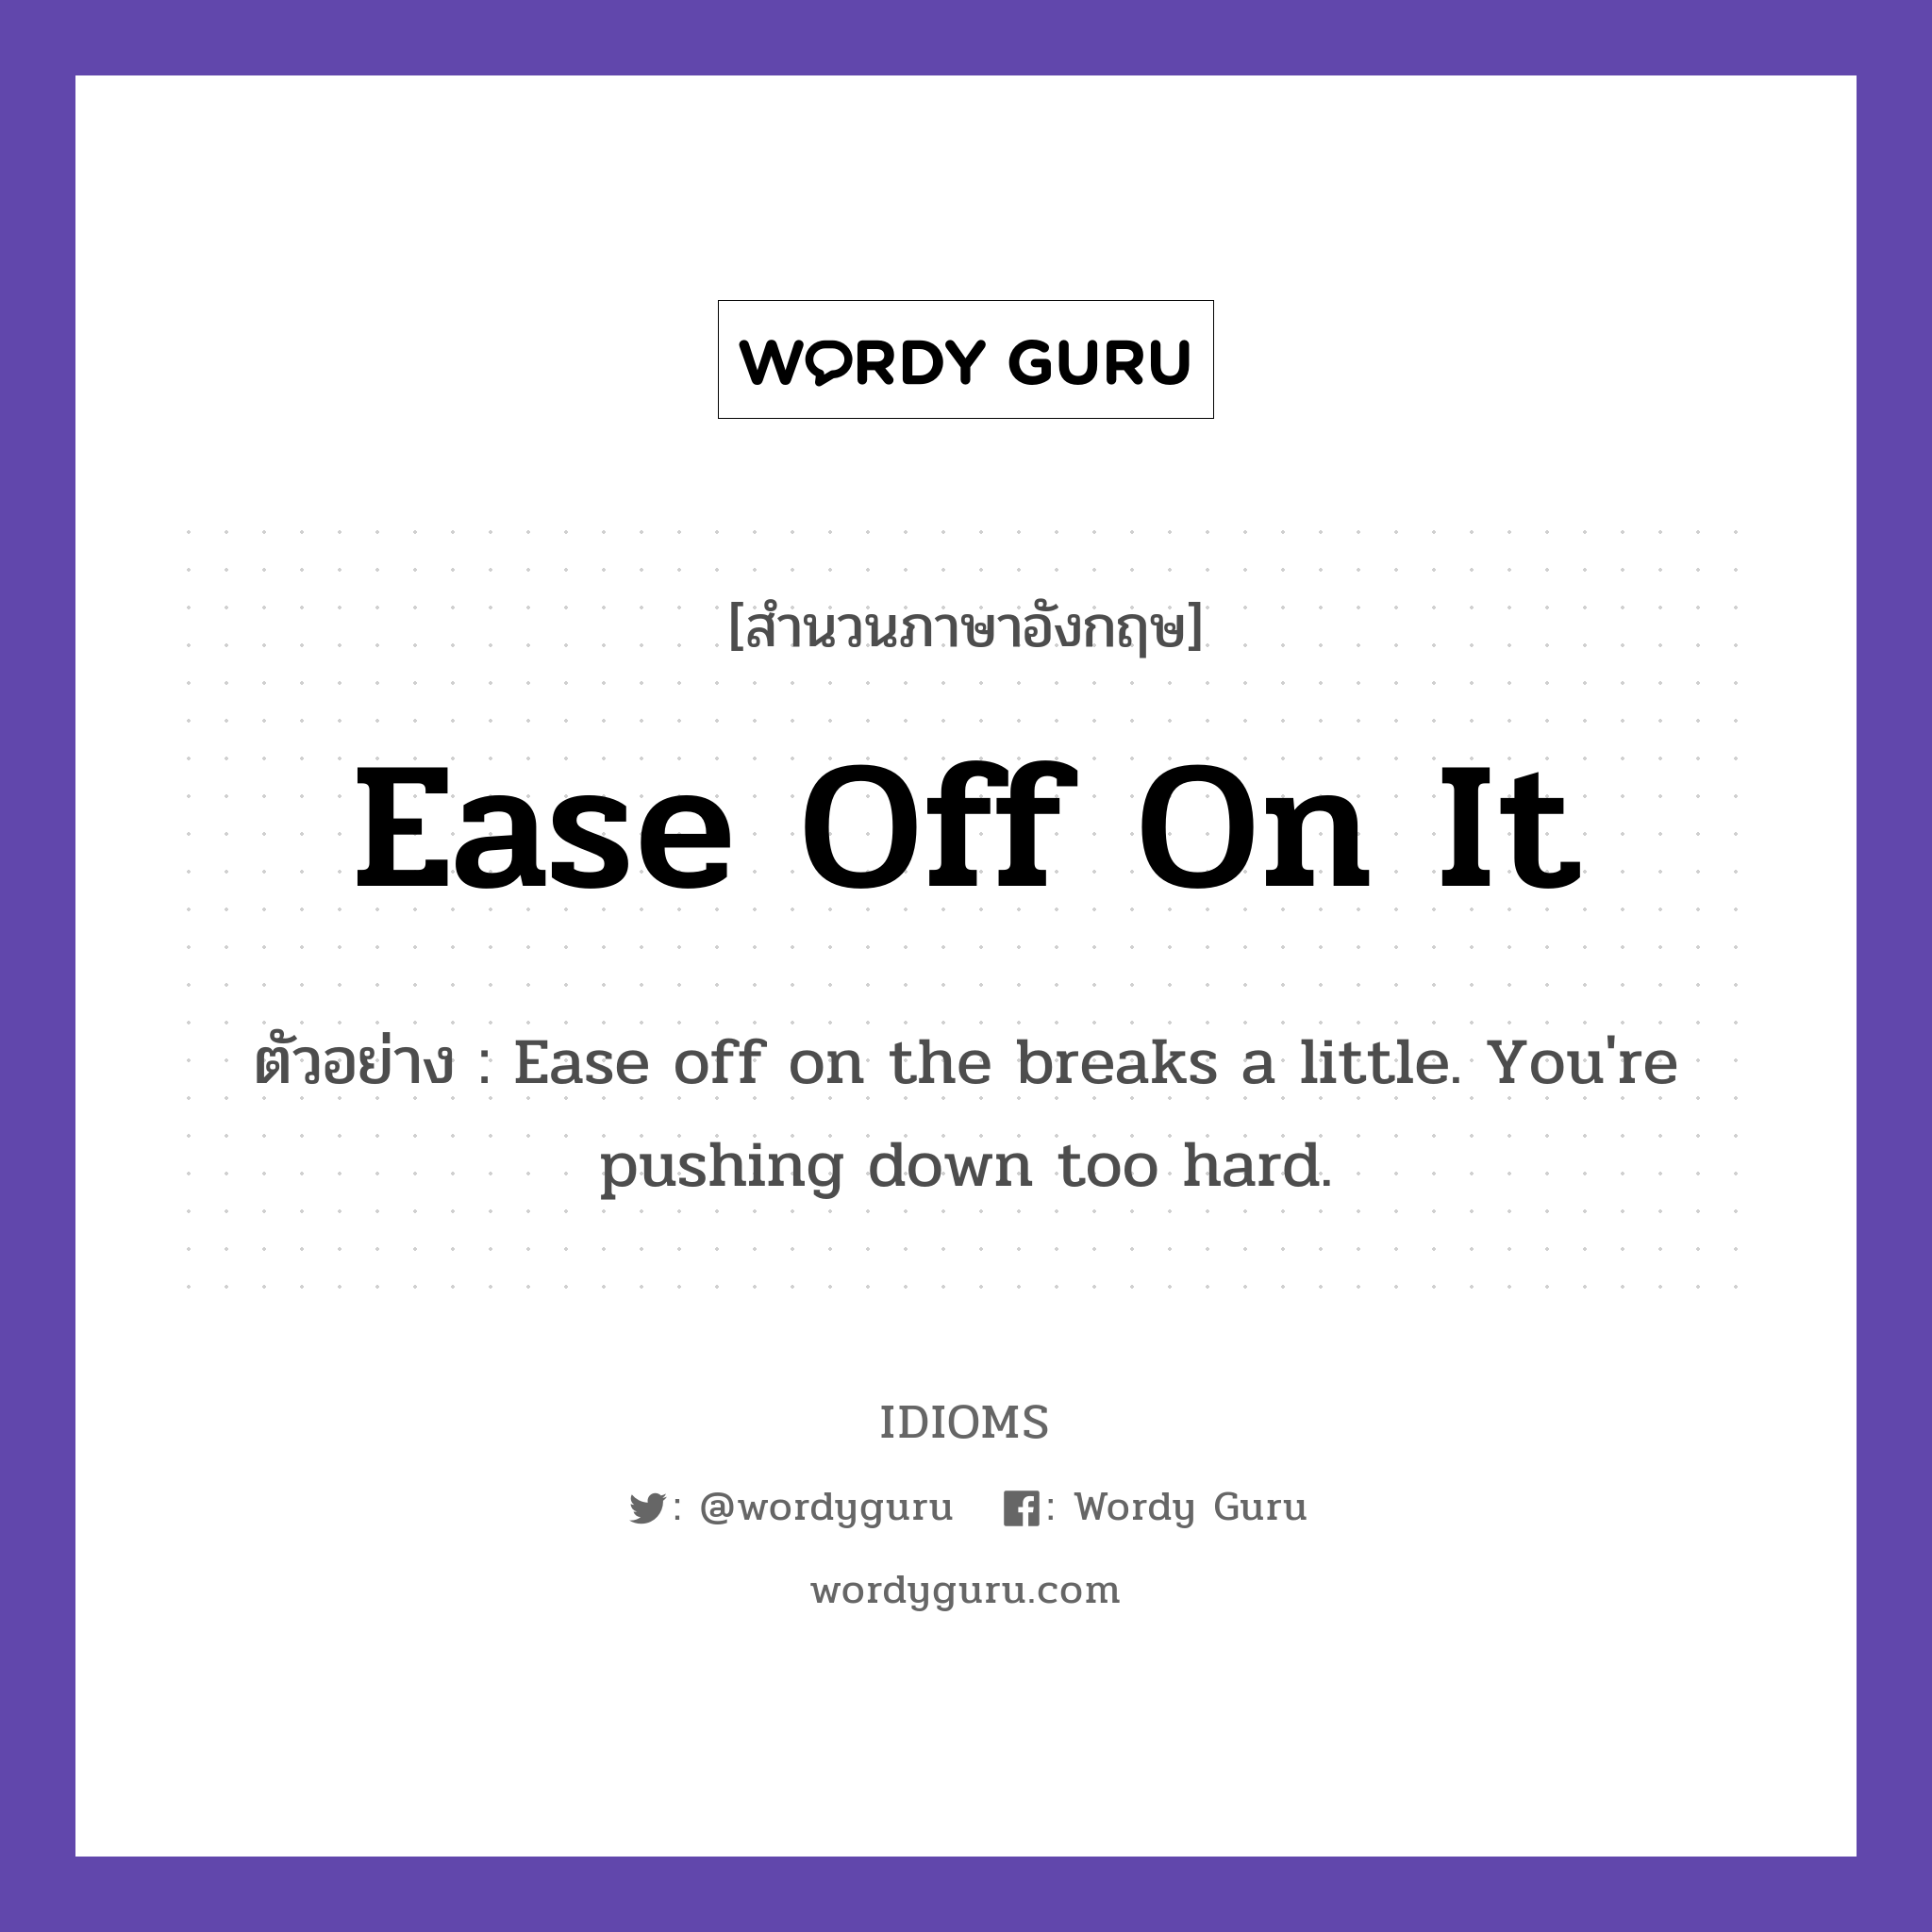 Ease Off On It แปลว่า?, สำนวนภาษาอังกฤษ Ease Off On It ตัวอย่าง Ease off on the breaks a little. You're pushing down too hard.